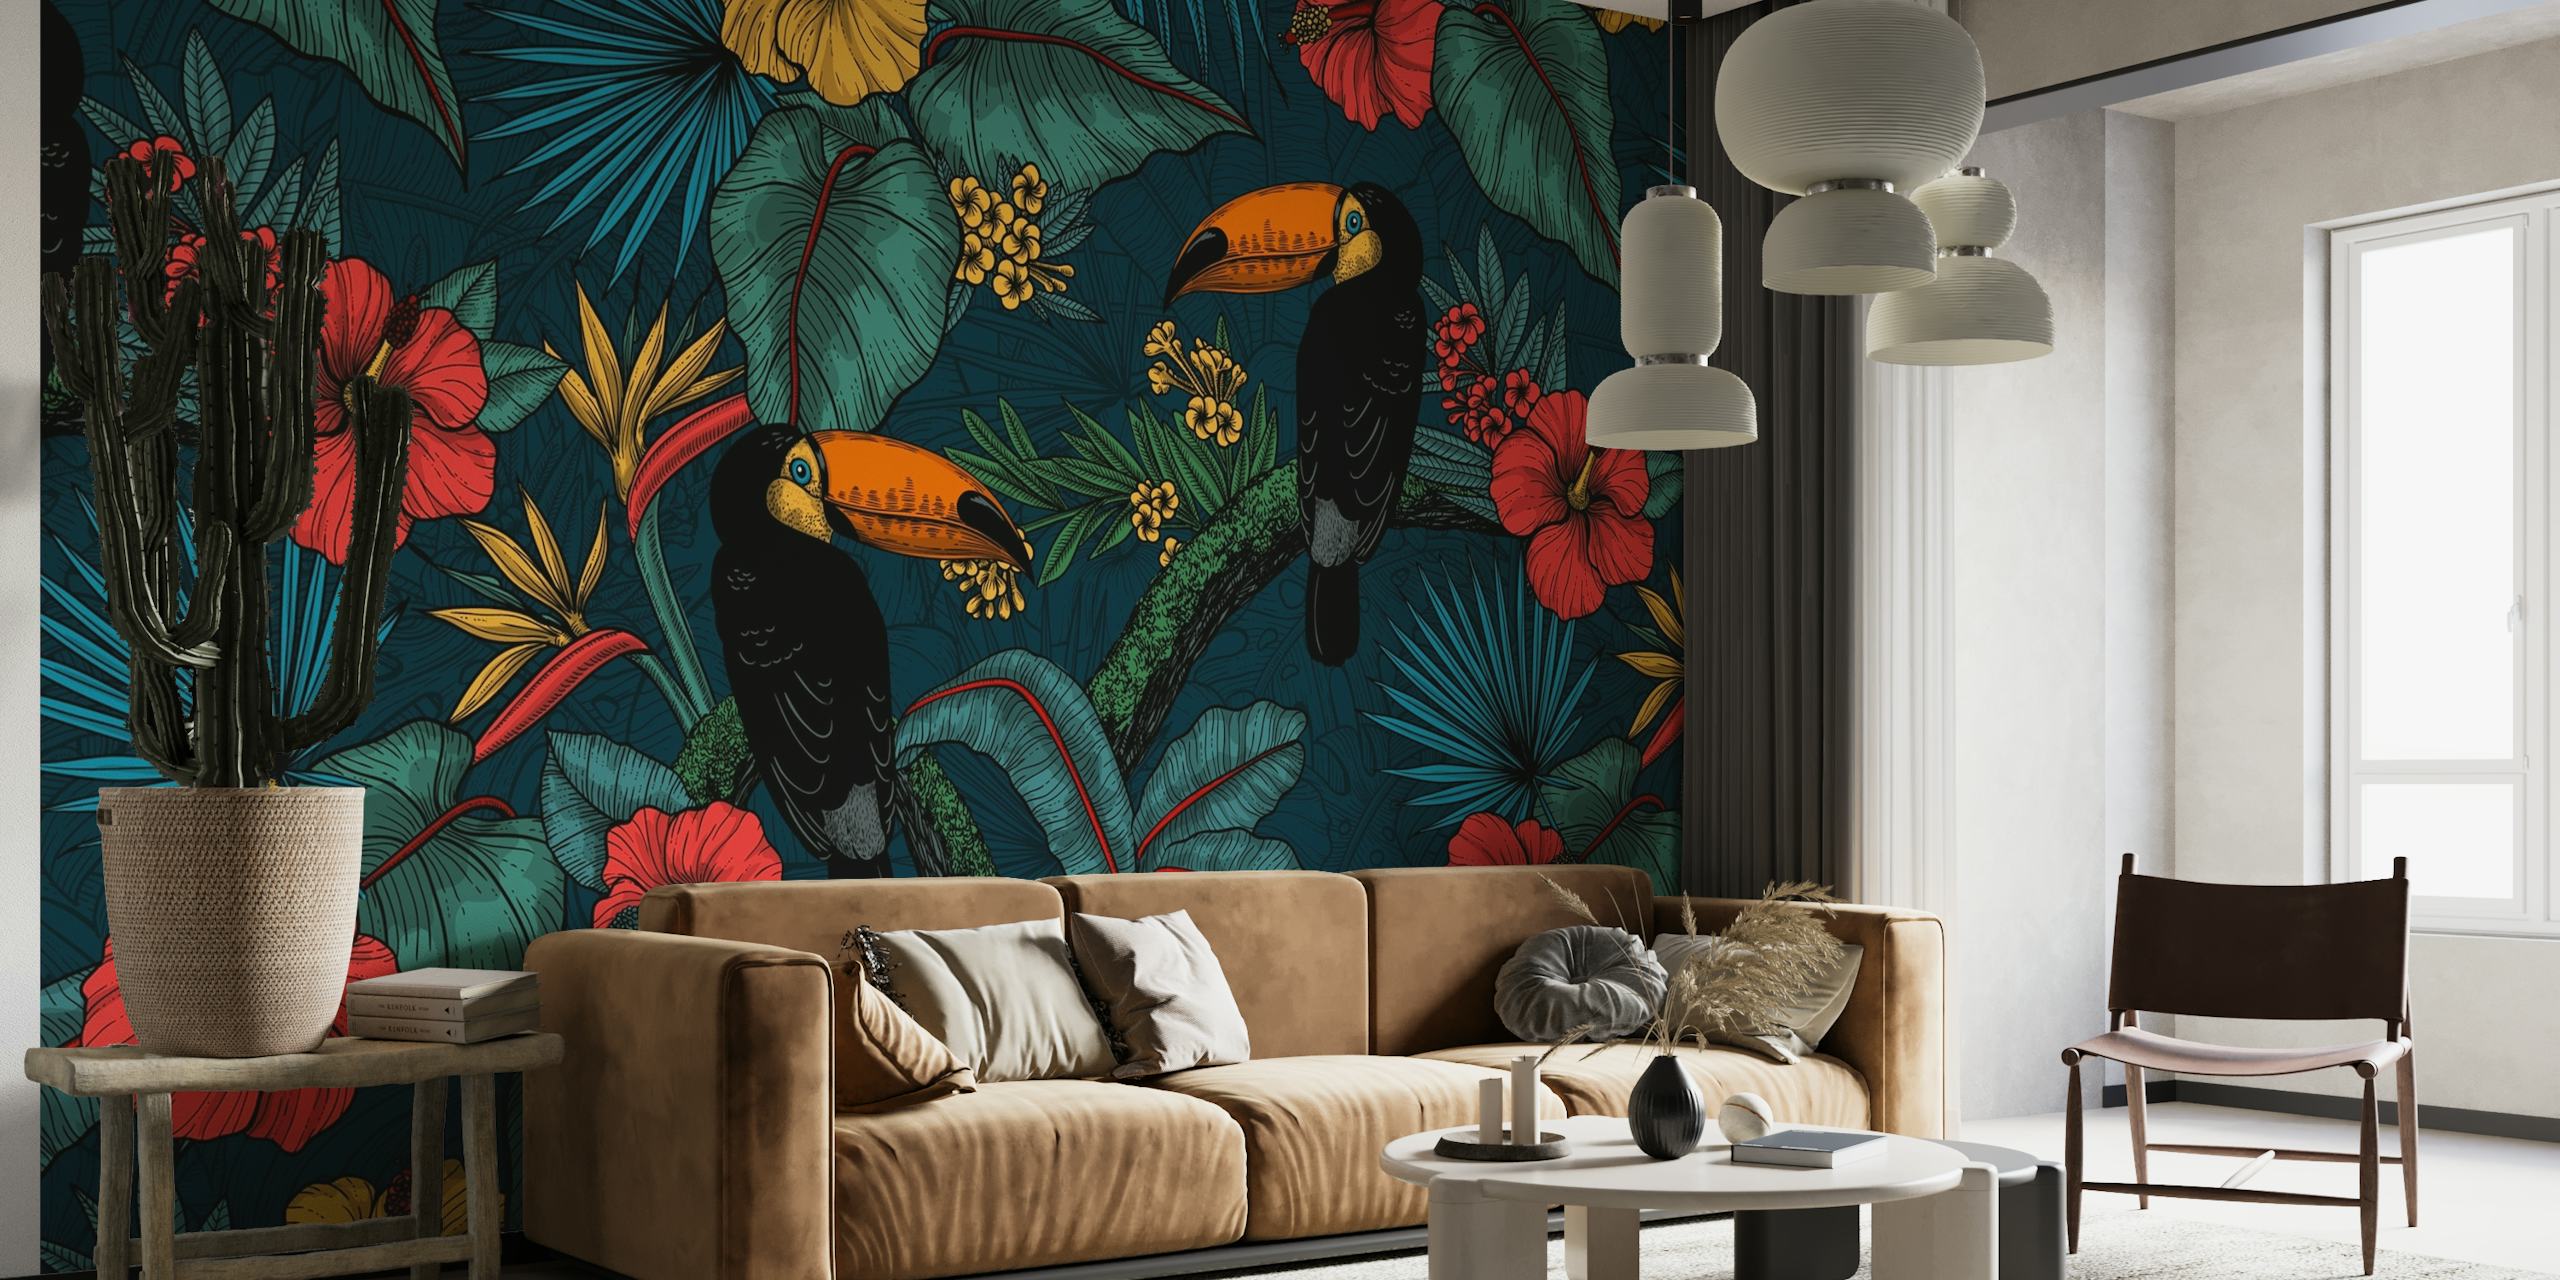 Toucan Garden wall mural with colorful toucans and tropical flowers on a teal background.